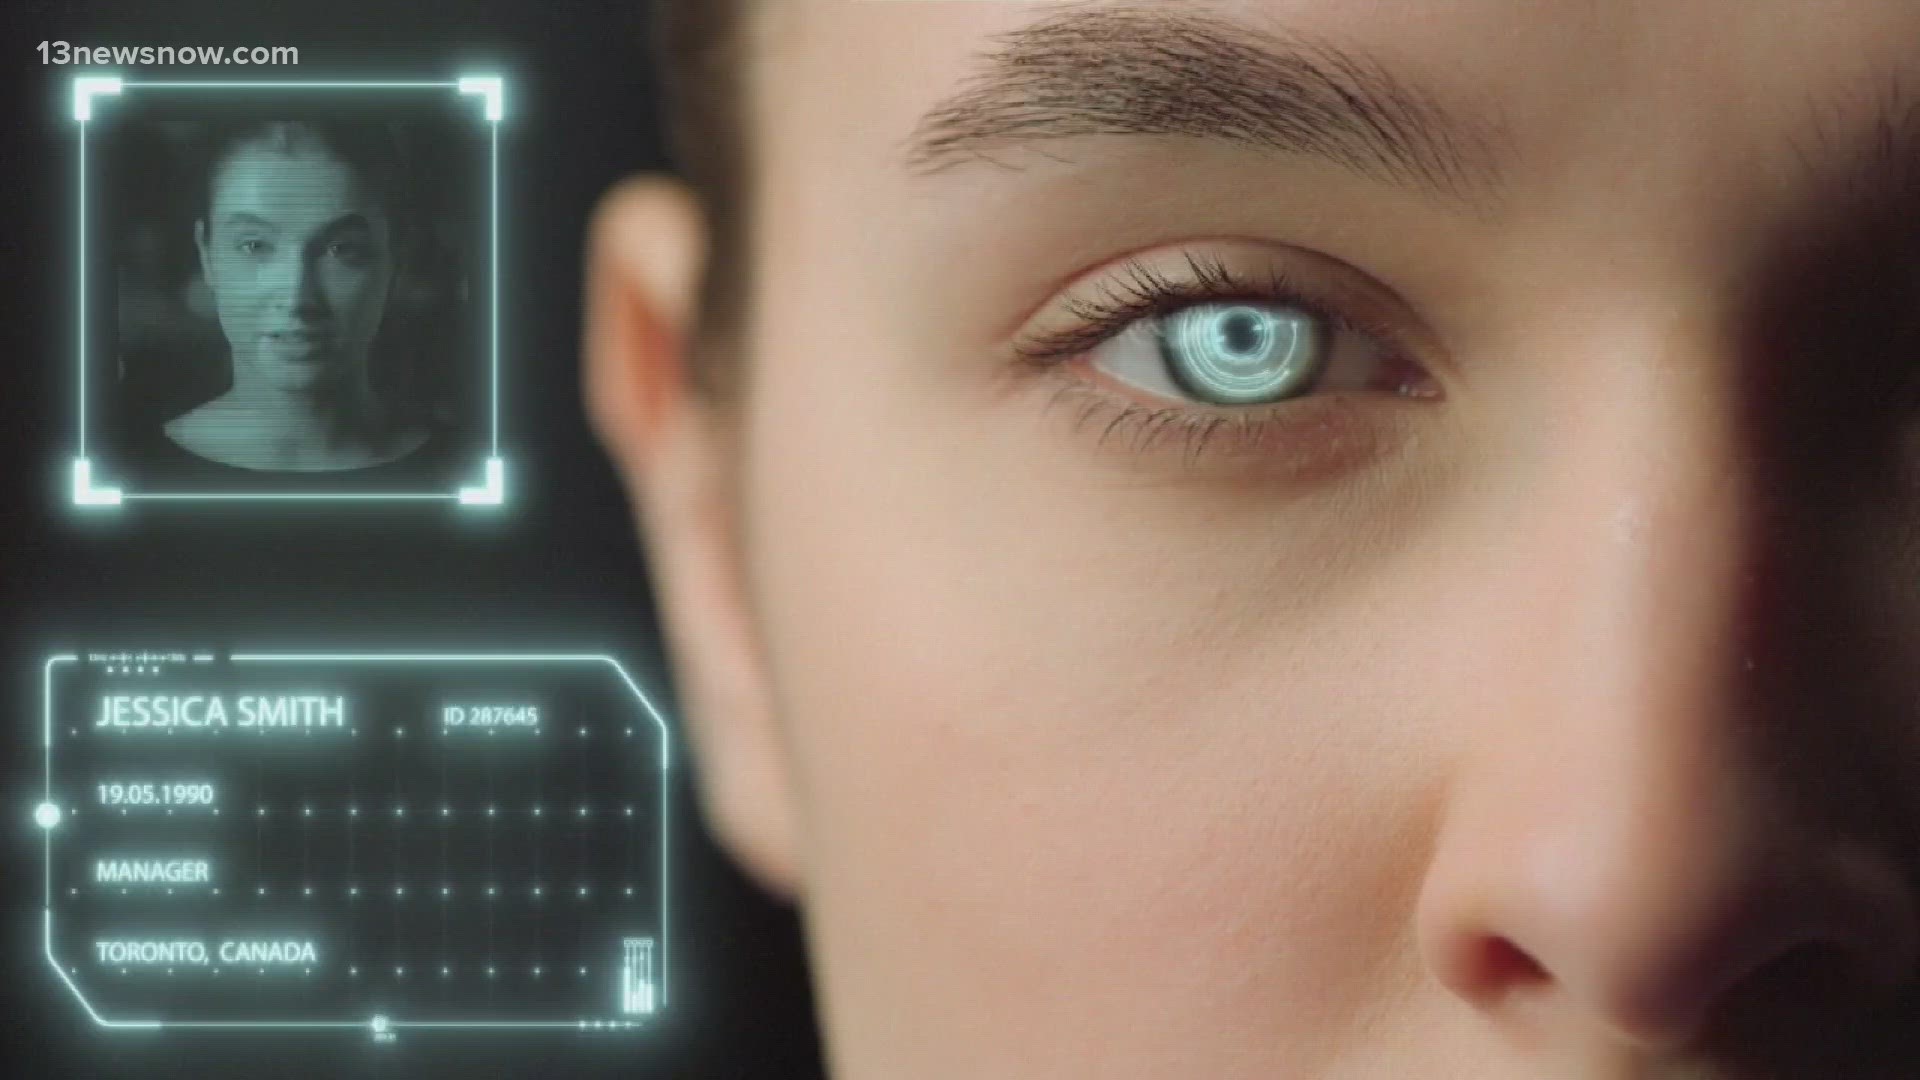 There's a new movement to use facial recognition in stores for security and it's not without controversy.